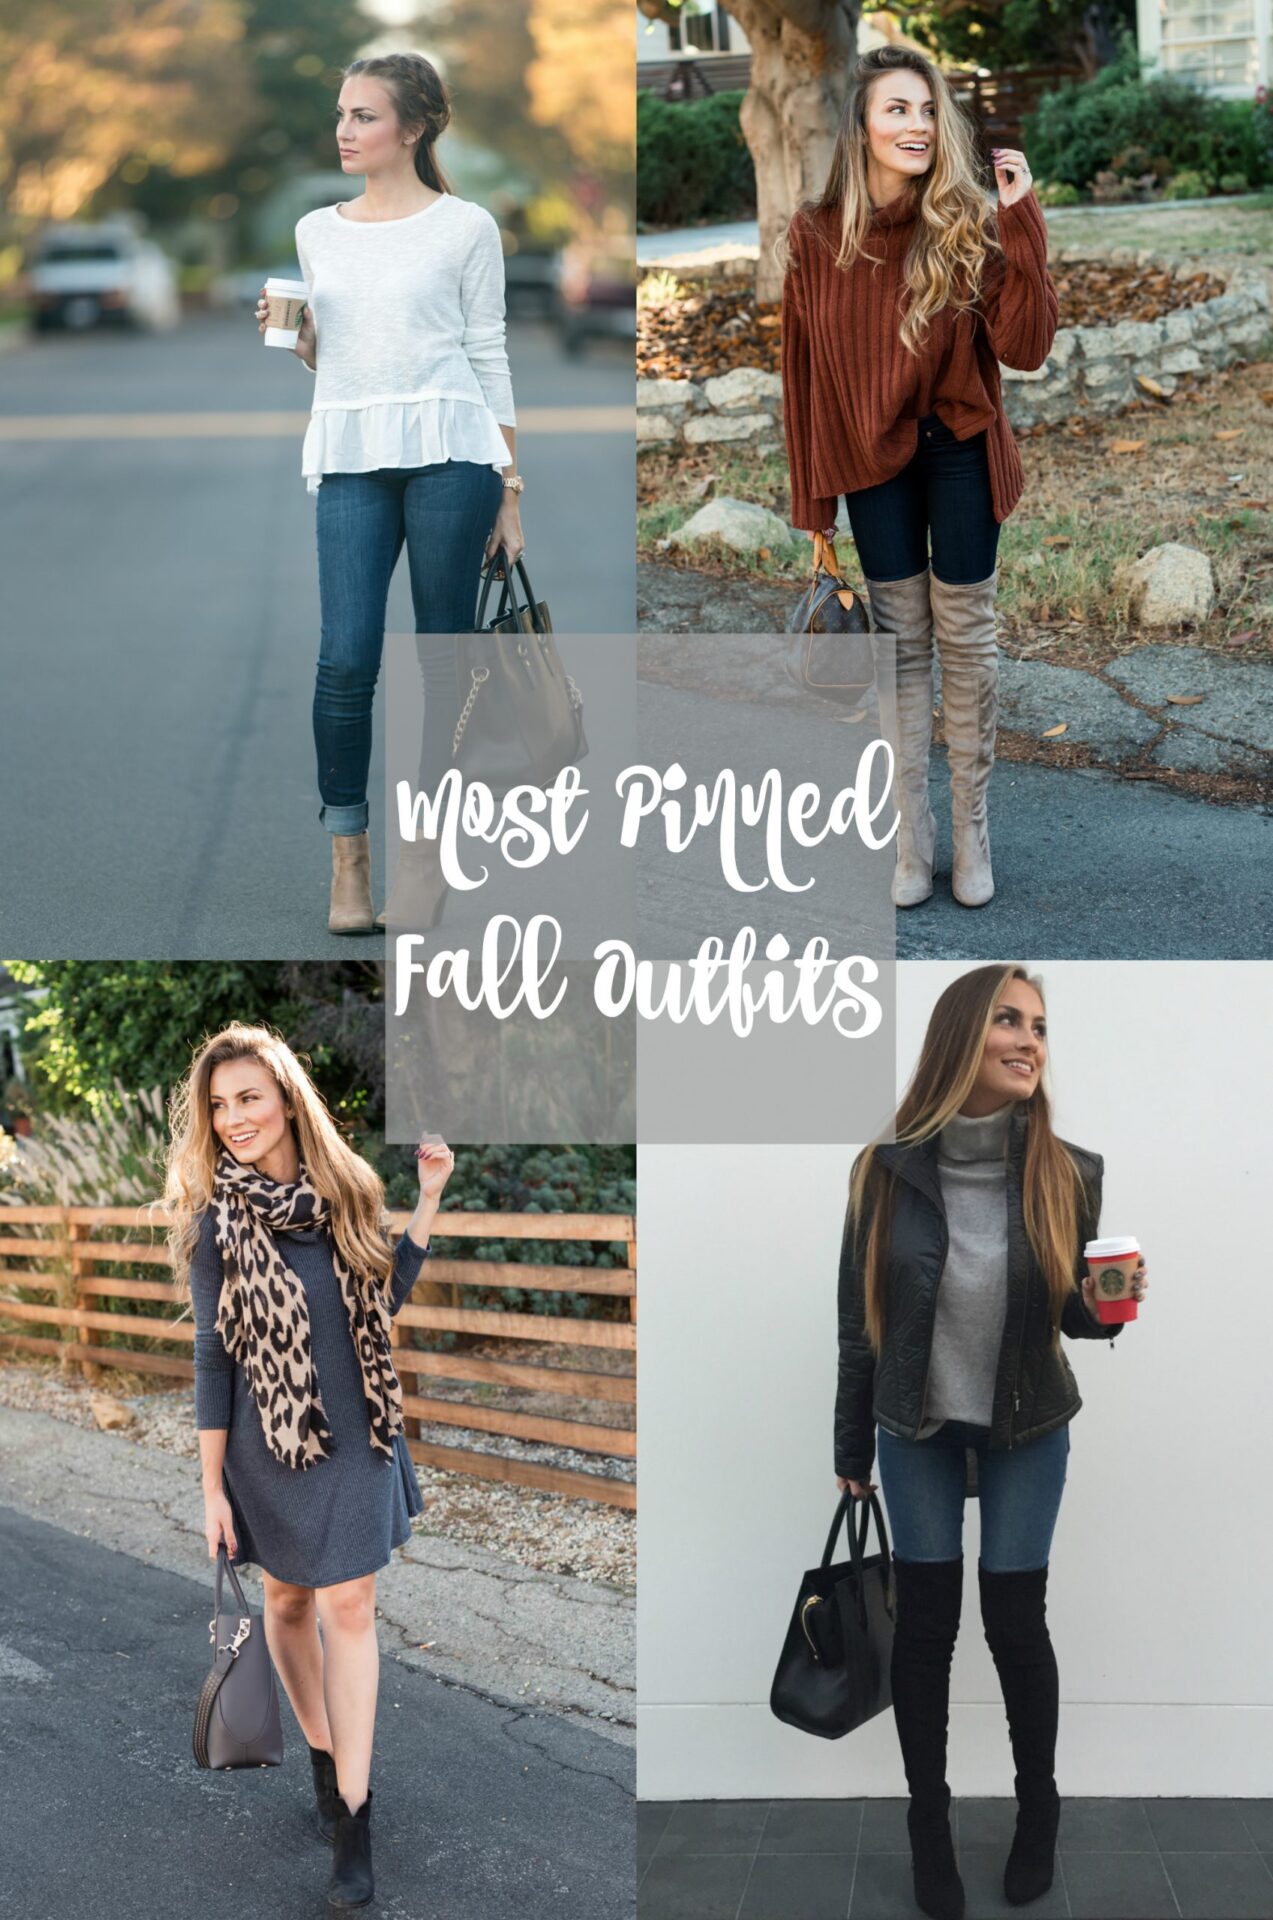 10 Most Popular Fall Outfits on Pinterest Angela Lanter Hello Gorgeous